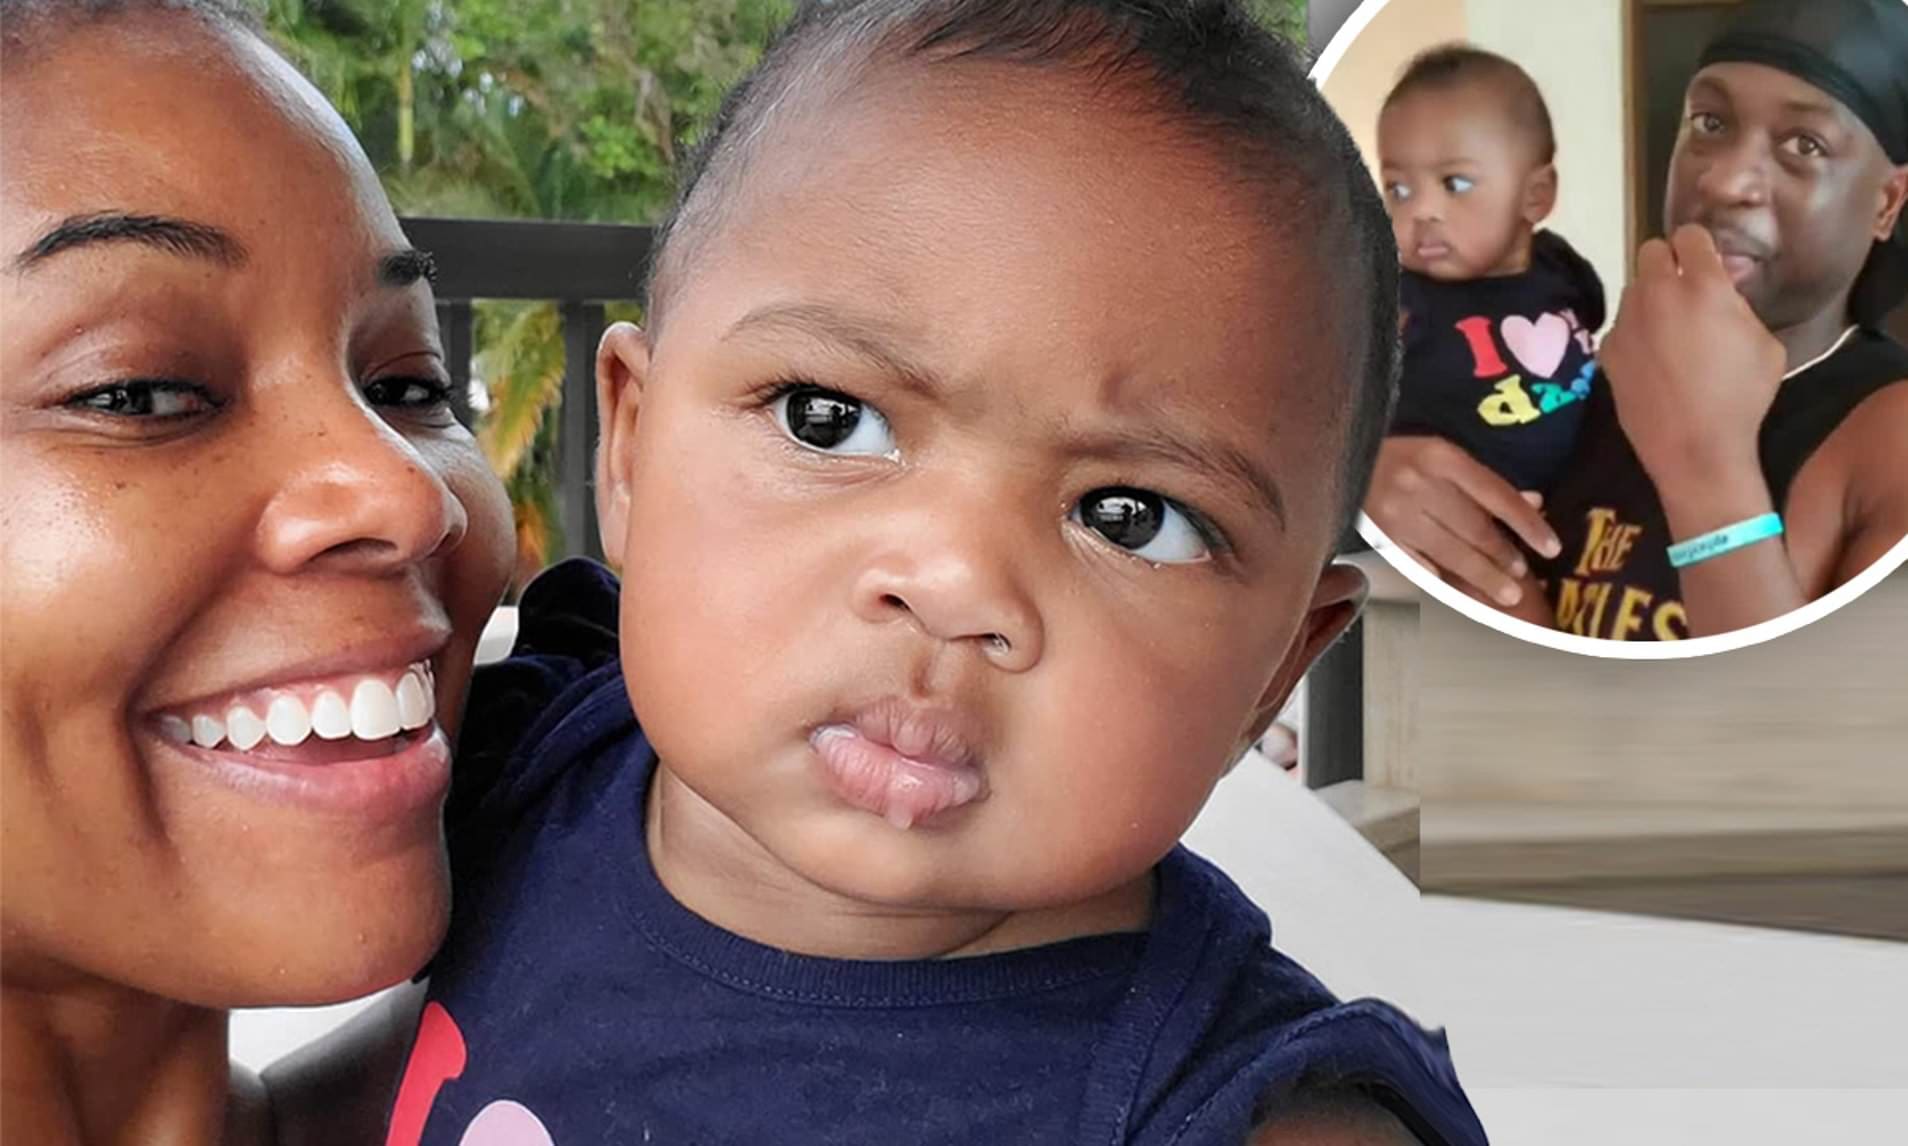 Gabrielle Union's Daughter, Kaavia James Is The Funniest baby In Her Mom's Arms - Check Out The Video